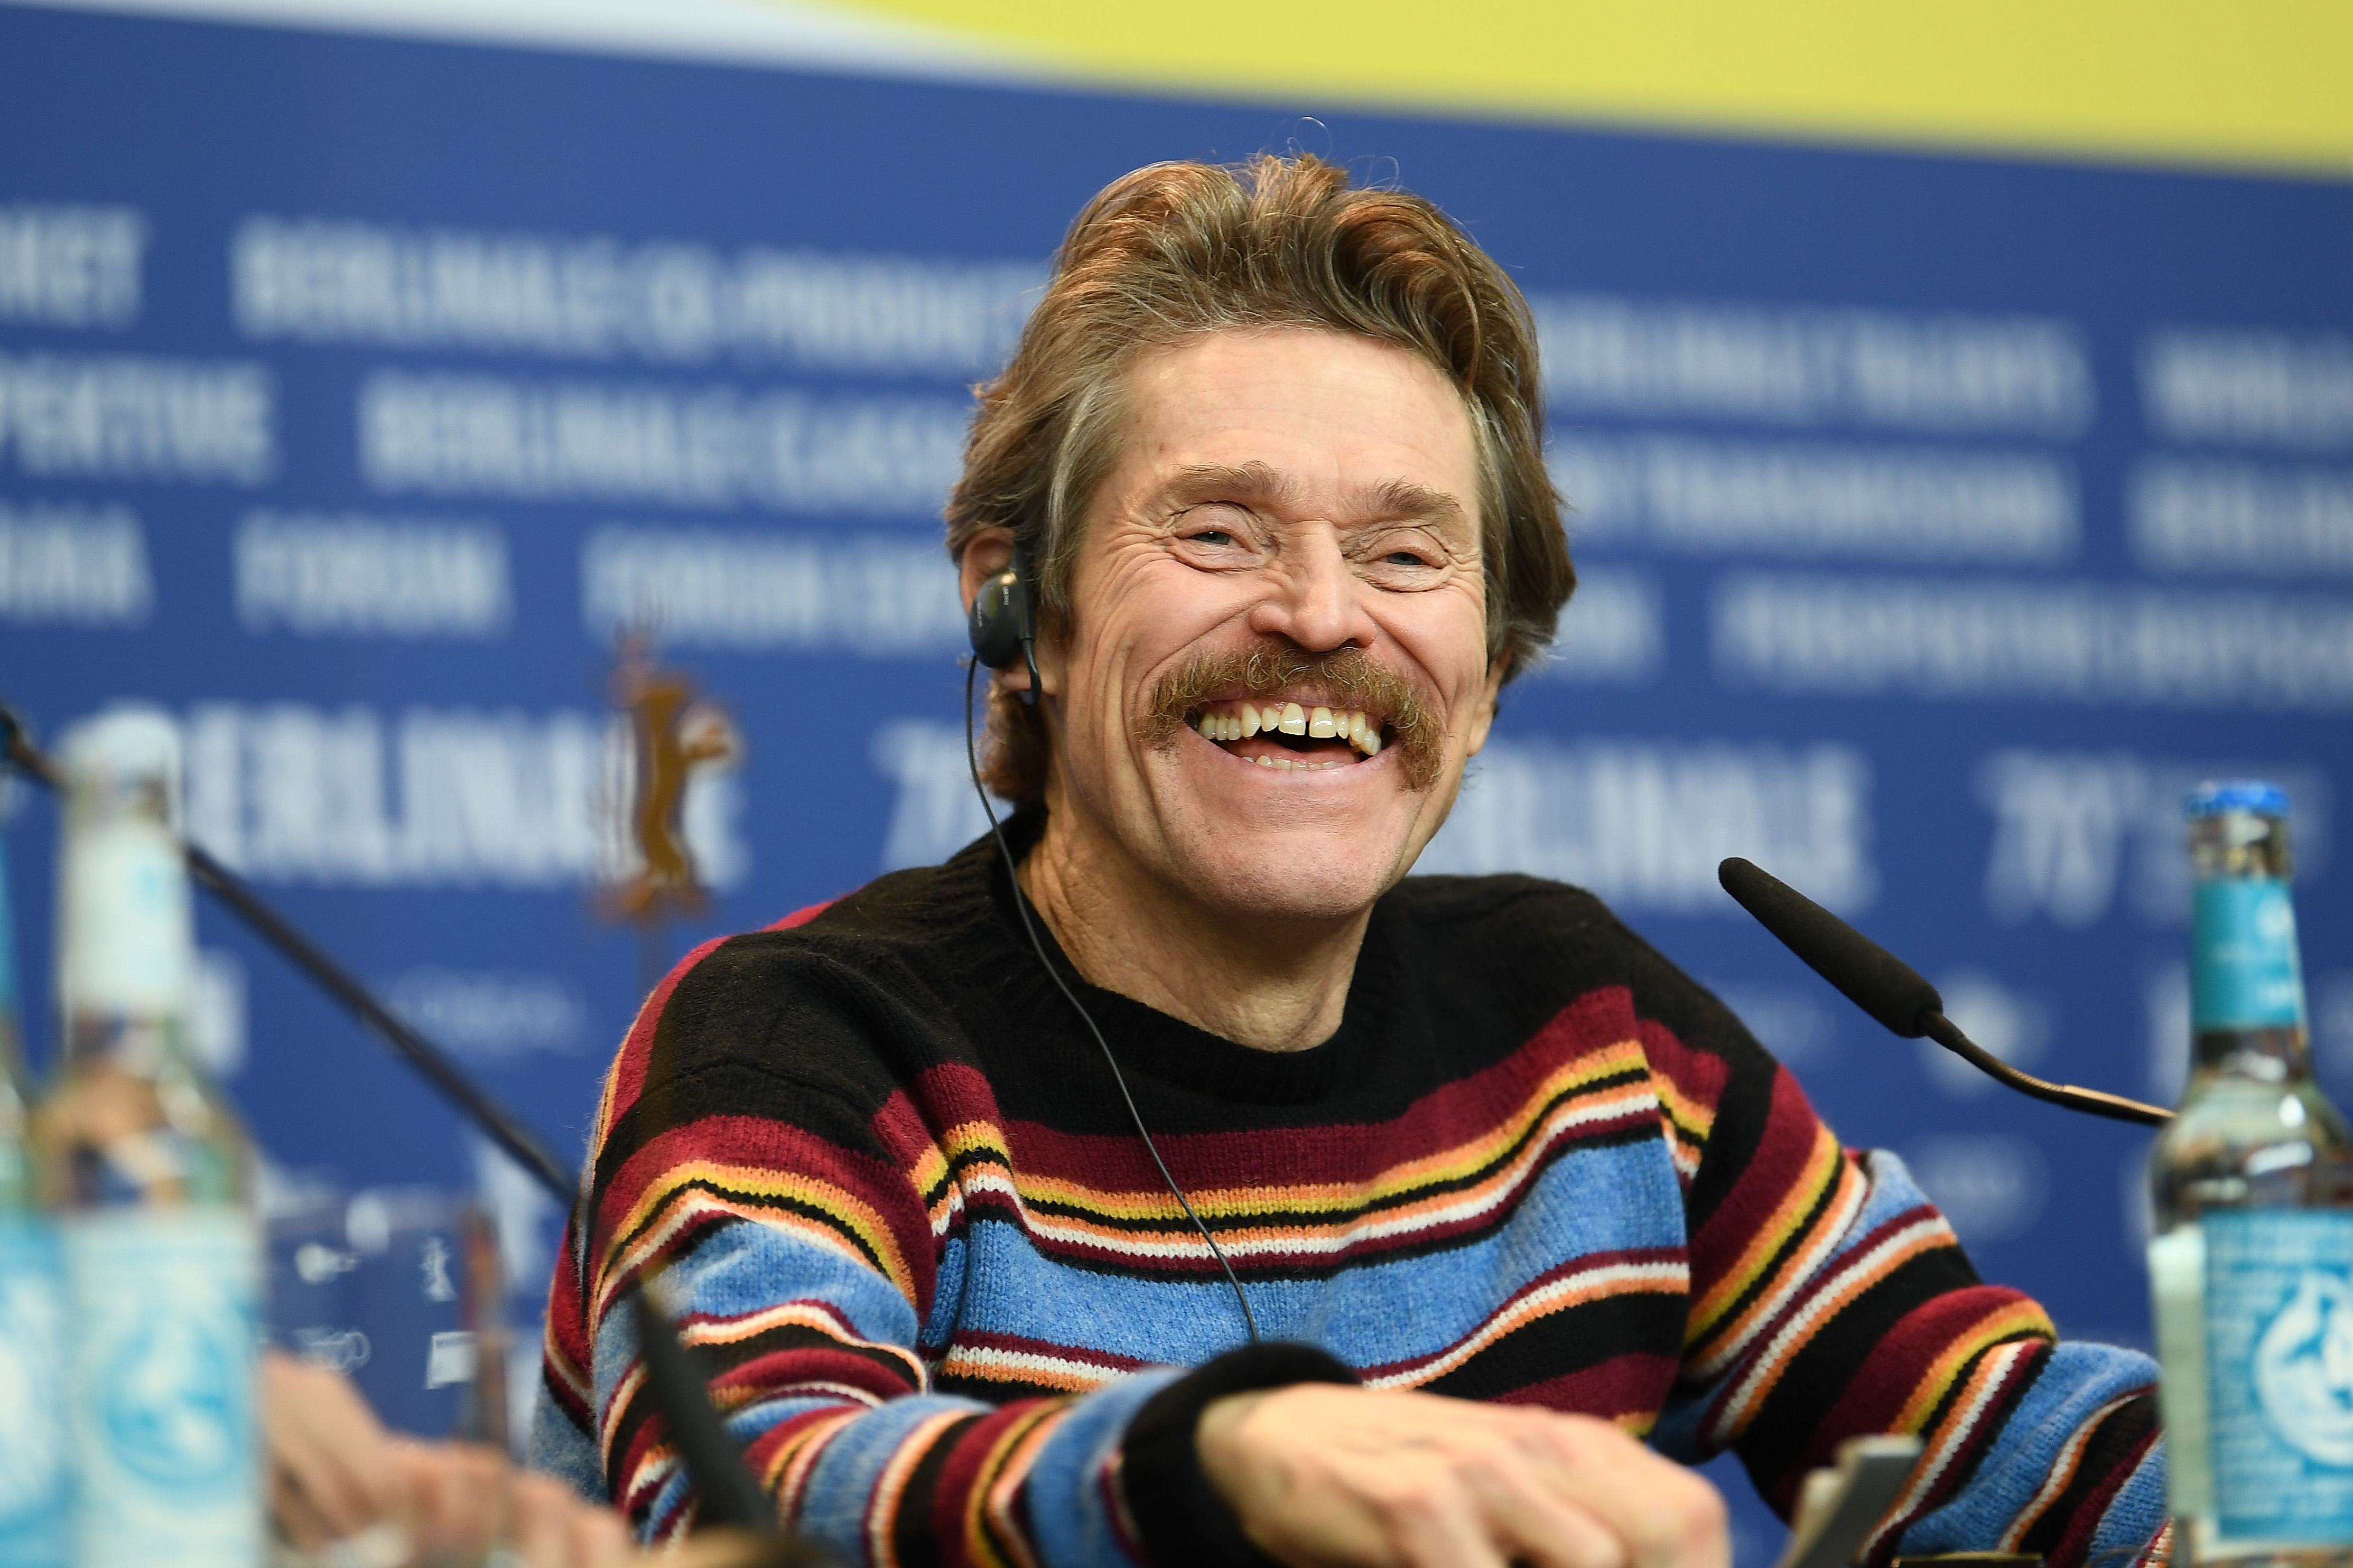 Willem Dafoe during a press conference during the 70th Berlinale International Film Festival Berlin on February 24, 2020, in Berlin, Germany. | Source: Getty Images